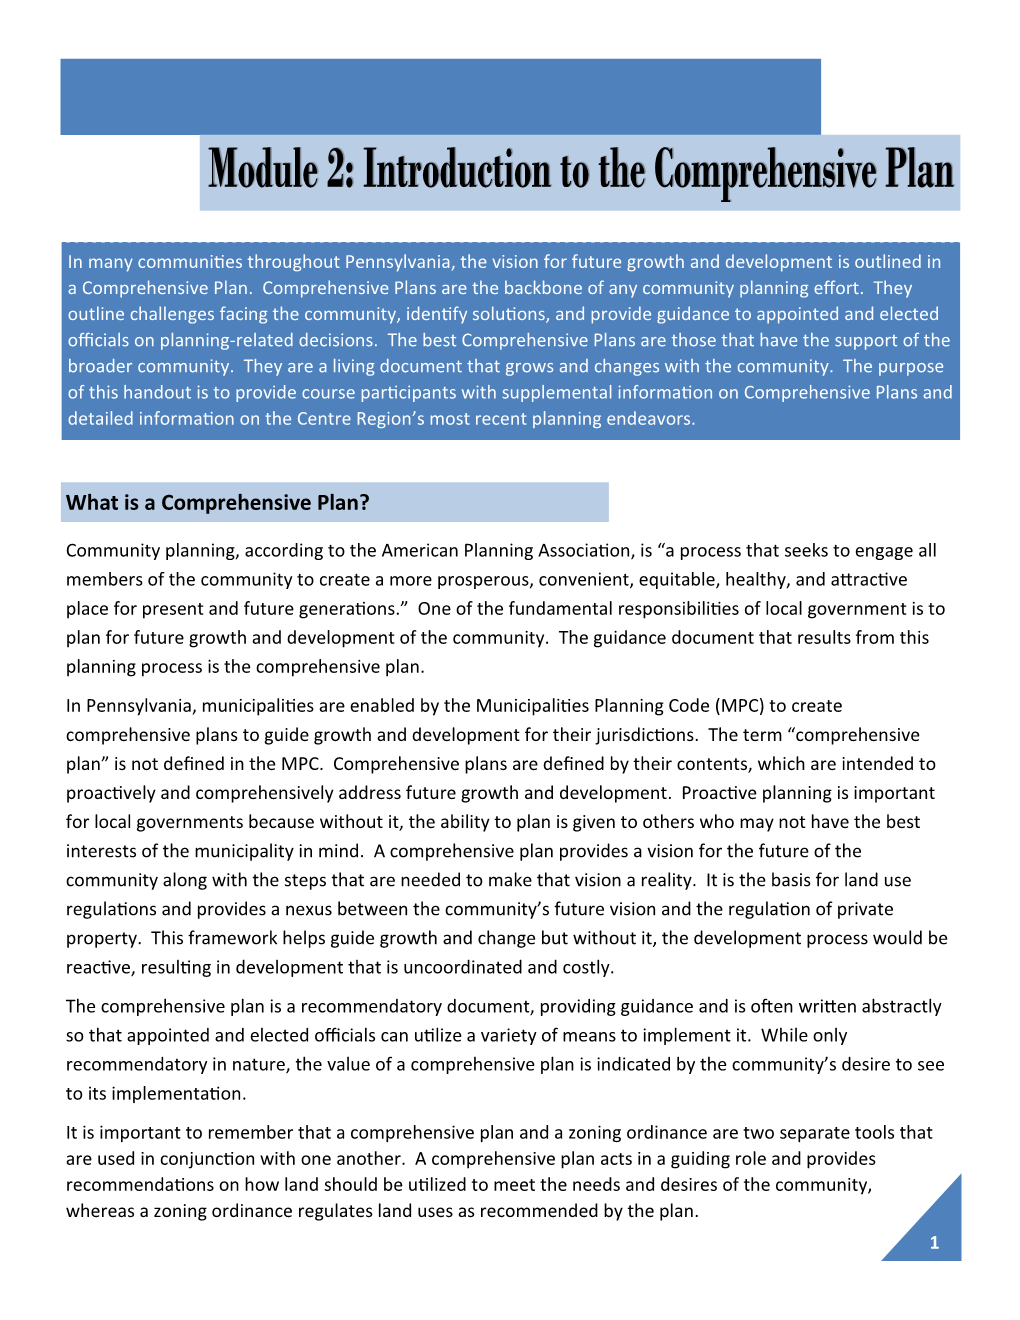 What Is a Comprehensive Plan?